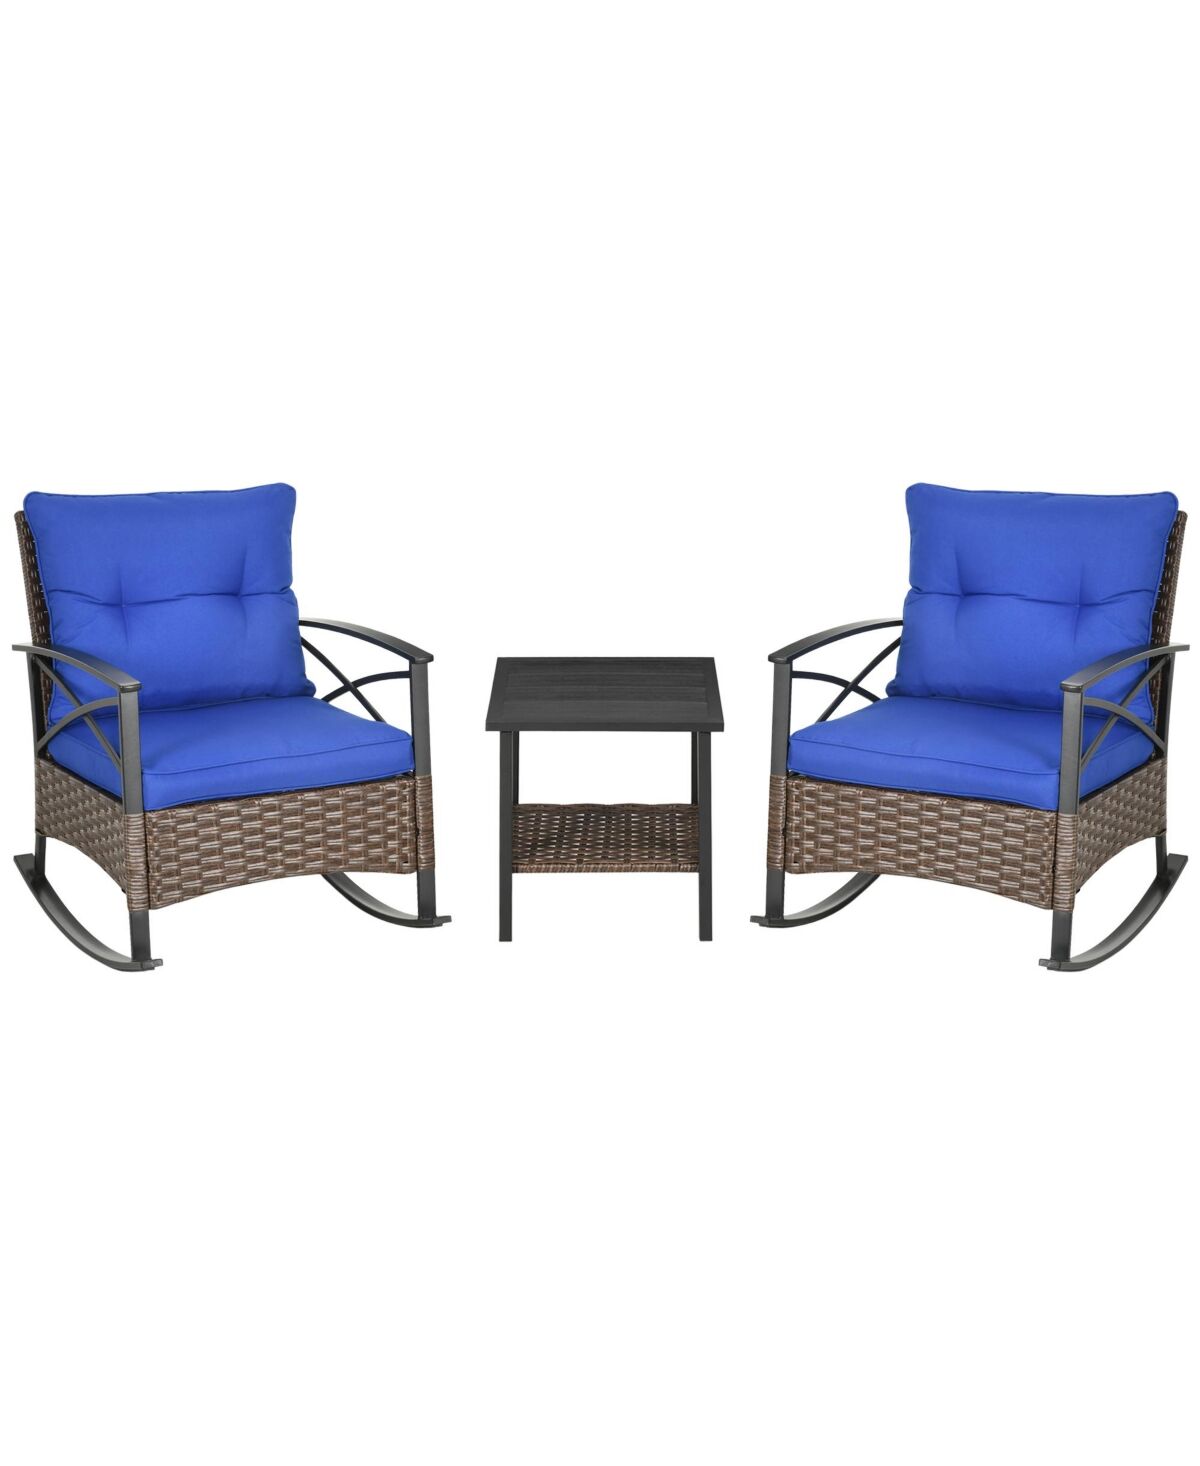 Outsunny 3 Piece Rocking Wicker Bistro Set, Outdoor Patio Furniture Set with two Porch Rocker Chairs, Cushions, Two-Tier Coffee Table for Garden, Back